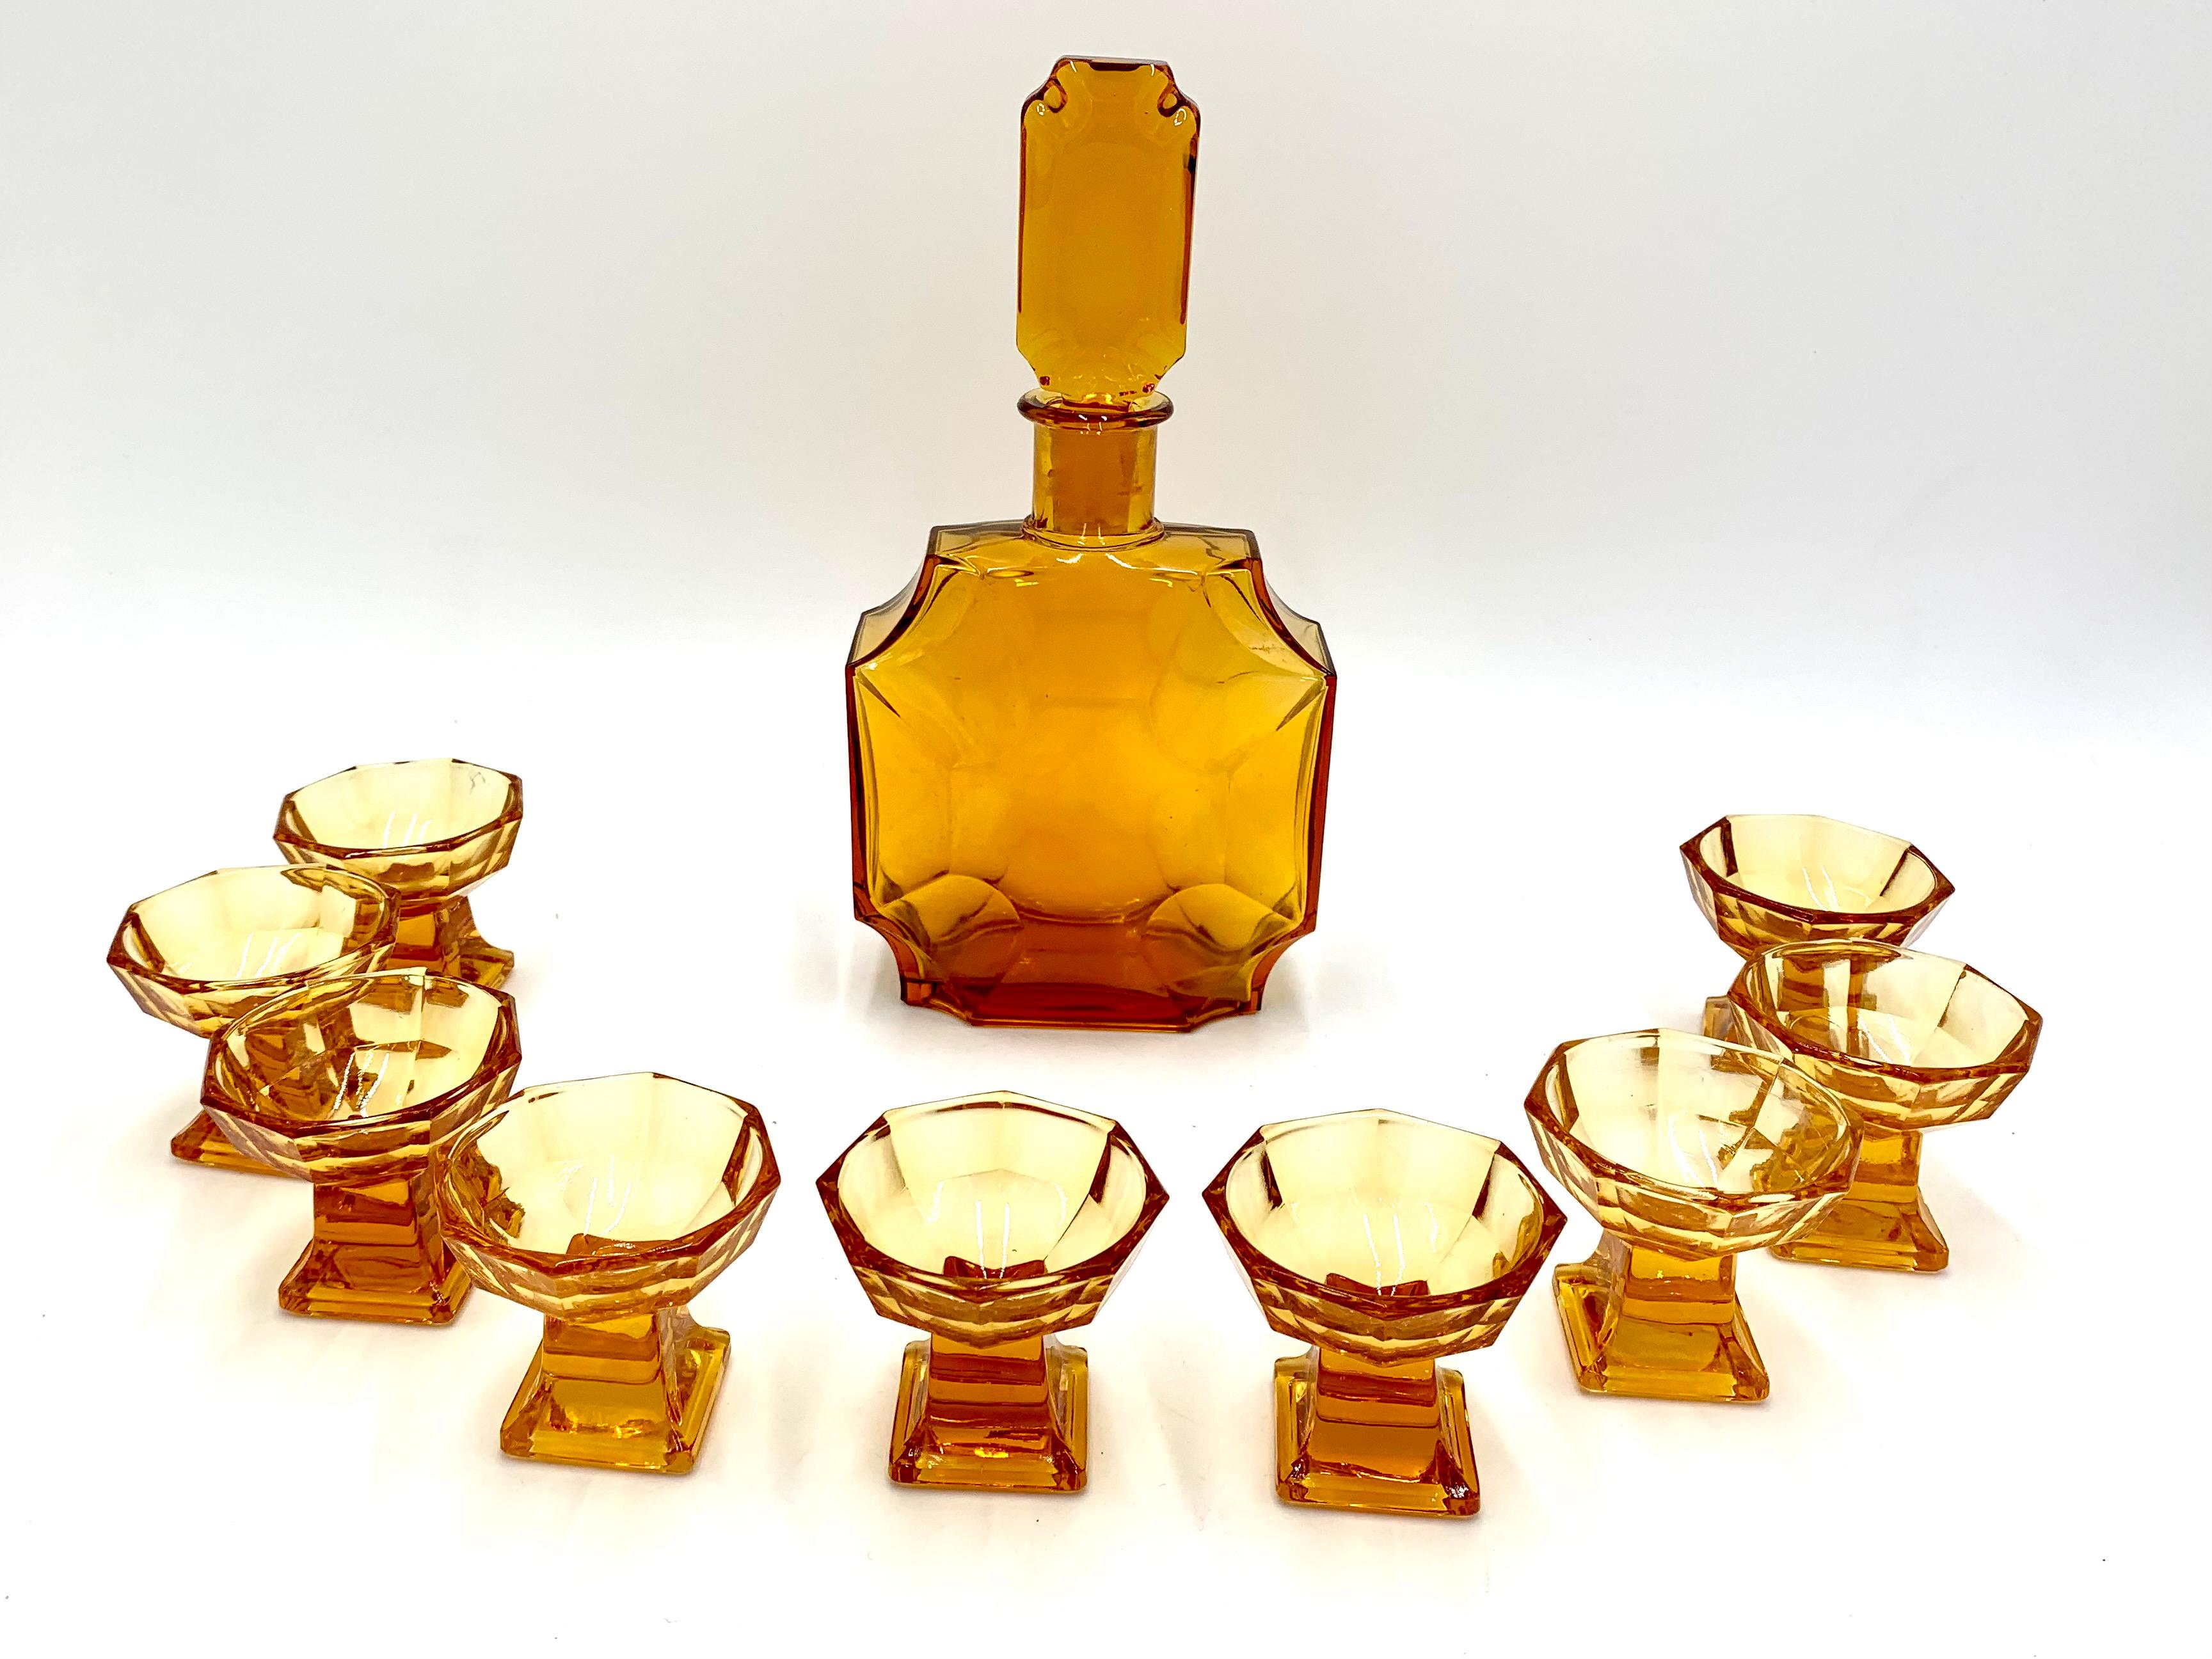 Art Deco crystal decanter complete with 10 octagonal vodka / honey liqueur glasses.

Made in the Czech Republic in the 1930s.

Very good condition

The height of the decanter with a cork is 24cm, without a cork 16.5cm, width 13cm, depth